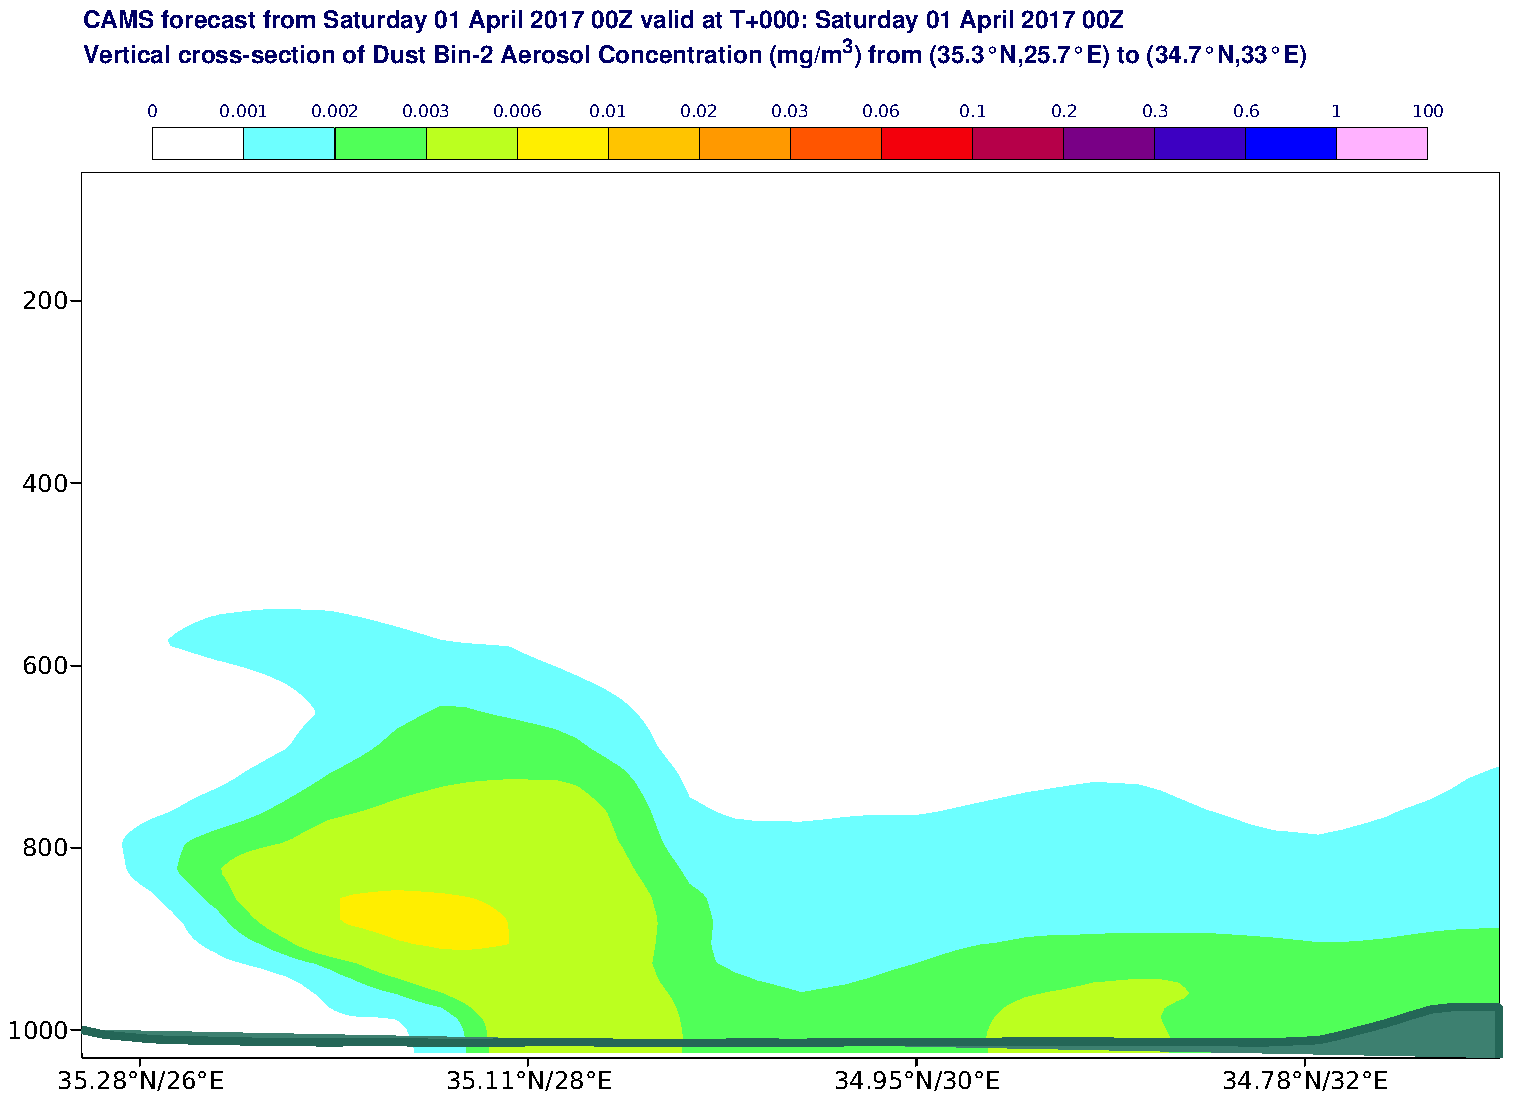 Vertical cross-section of Dust Bin-2 Aerosol Concentration (mg/m3) valid at T0 - 2017-04-01 00:00